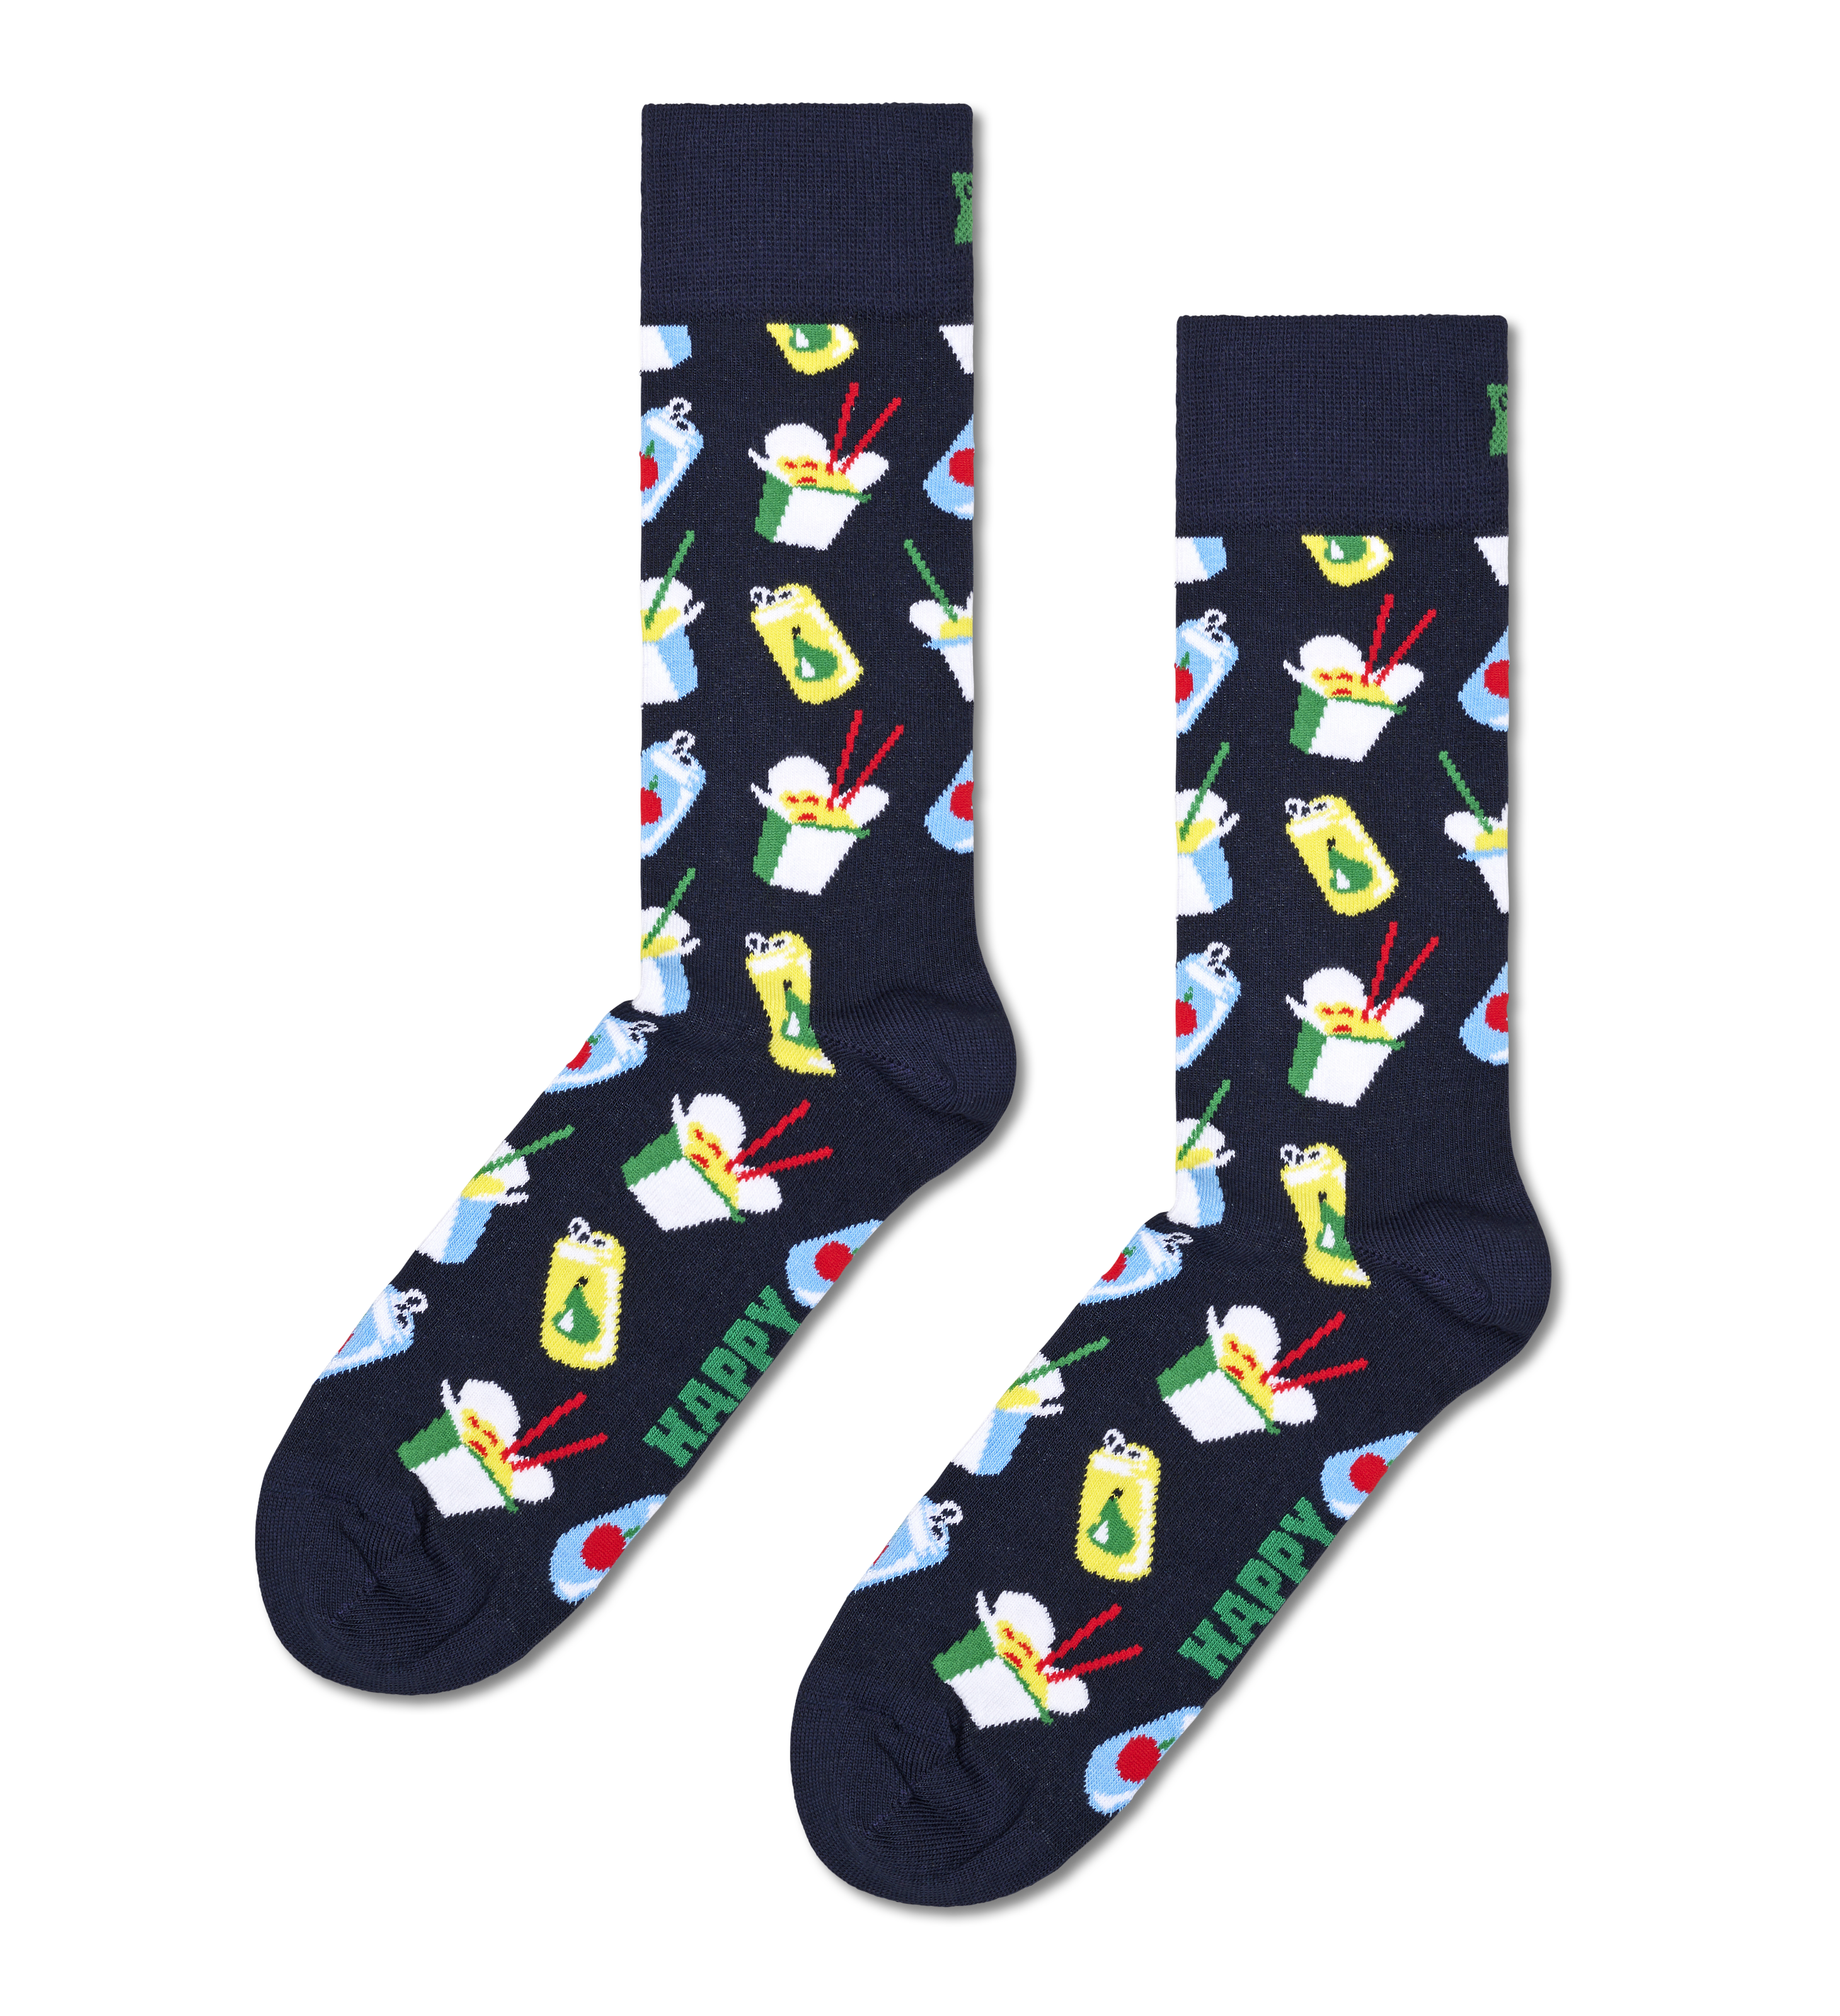 Happy Socks & Brink Commerce: Colorful global happiness